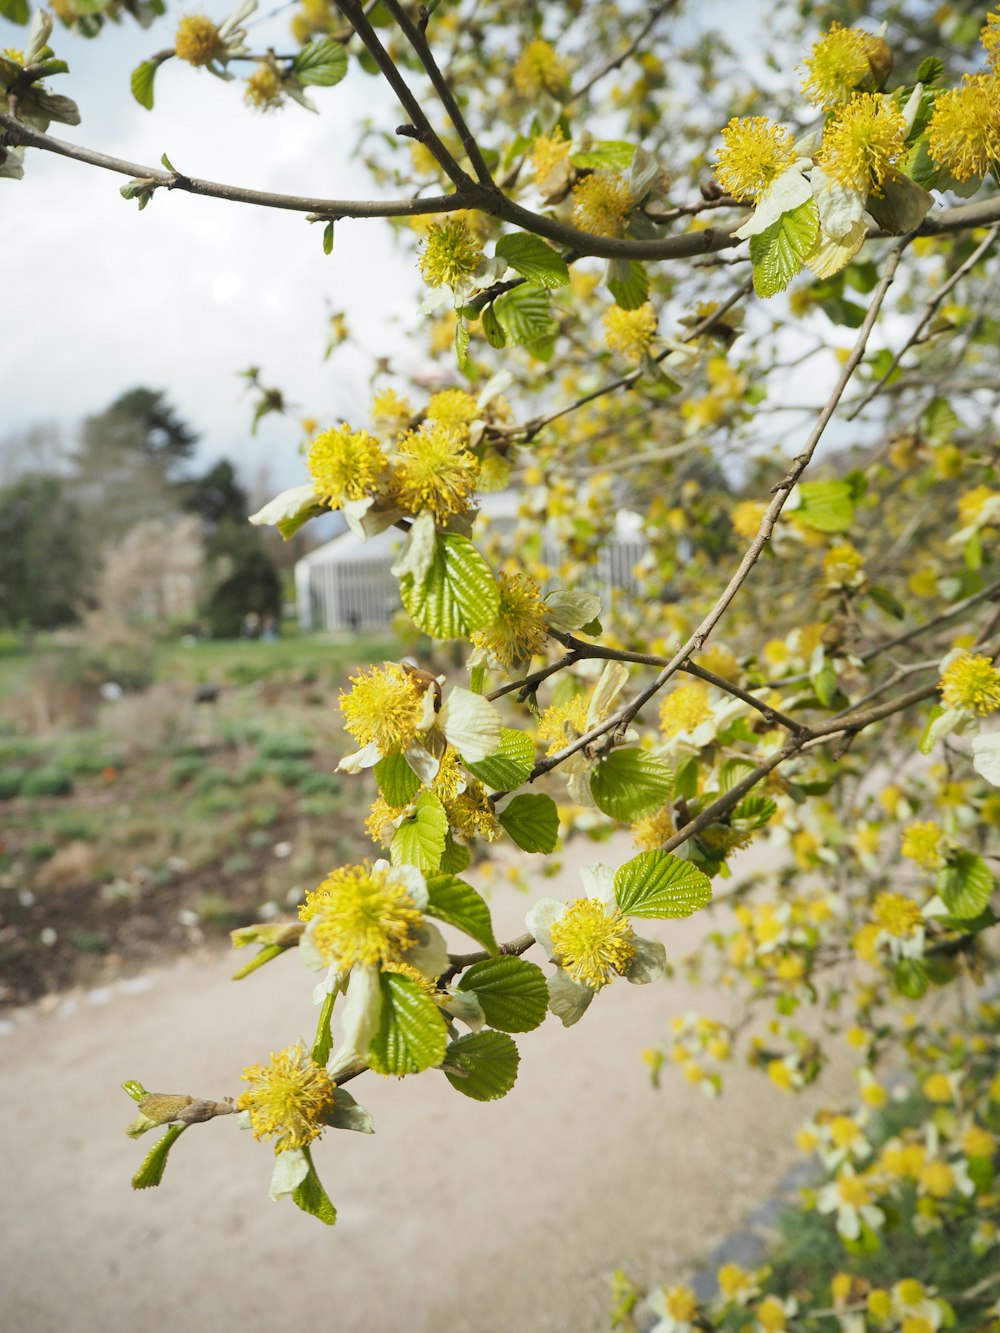 a tree branch with yellow flowers on it